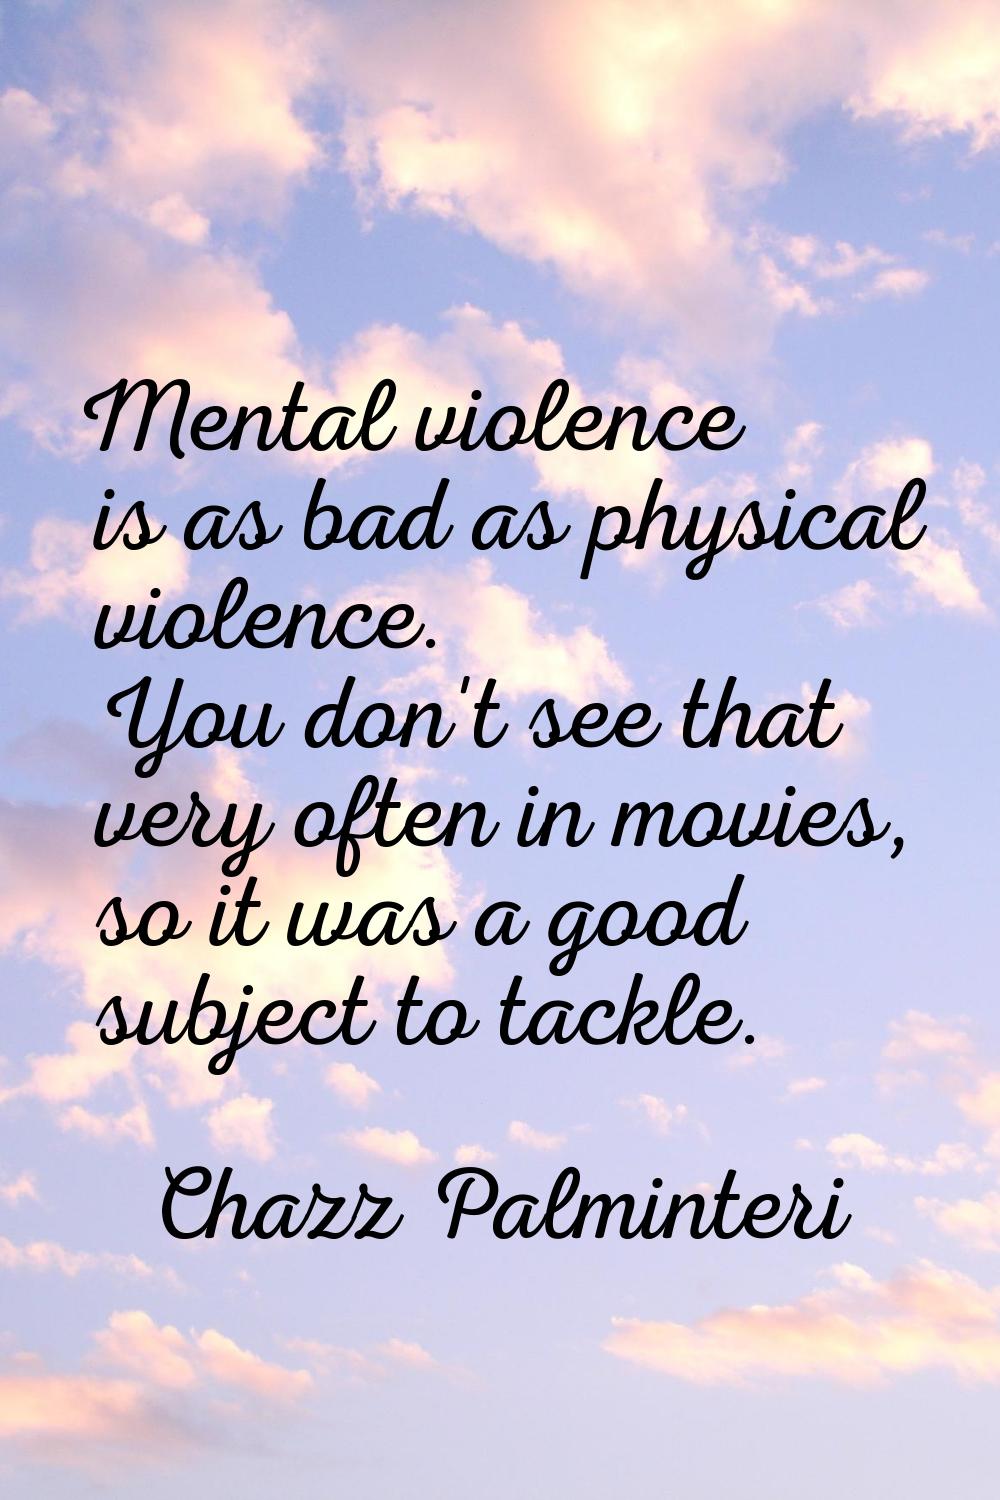 Mental violence is as bad as physical violence. You don't see that very often in movies, so it was 